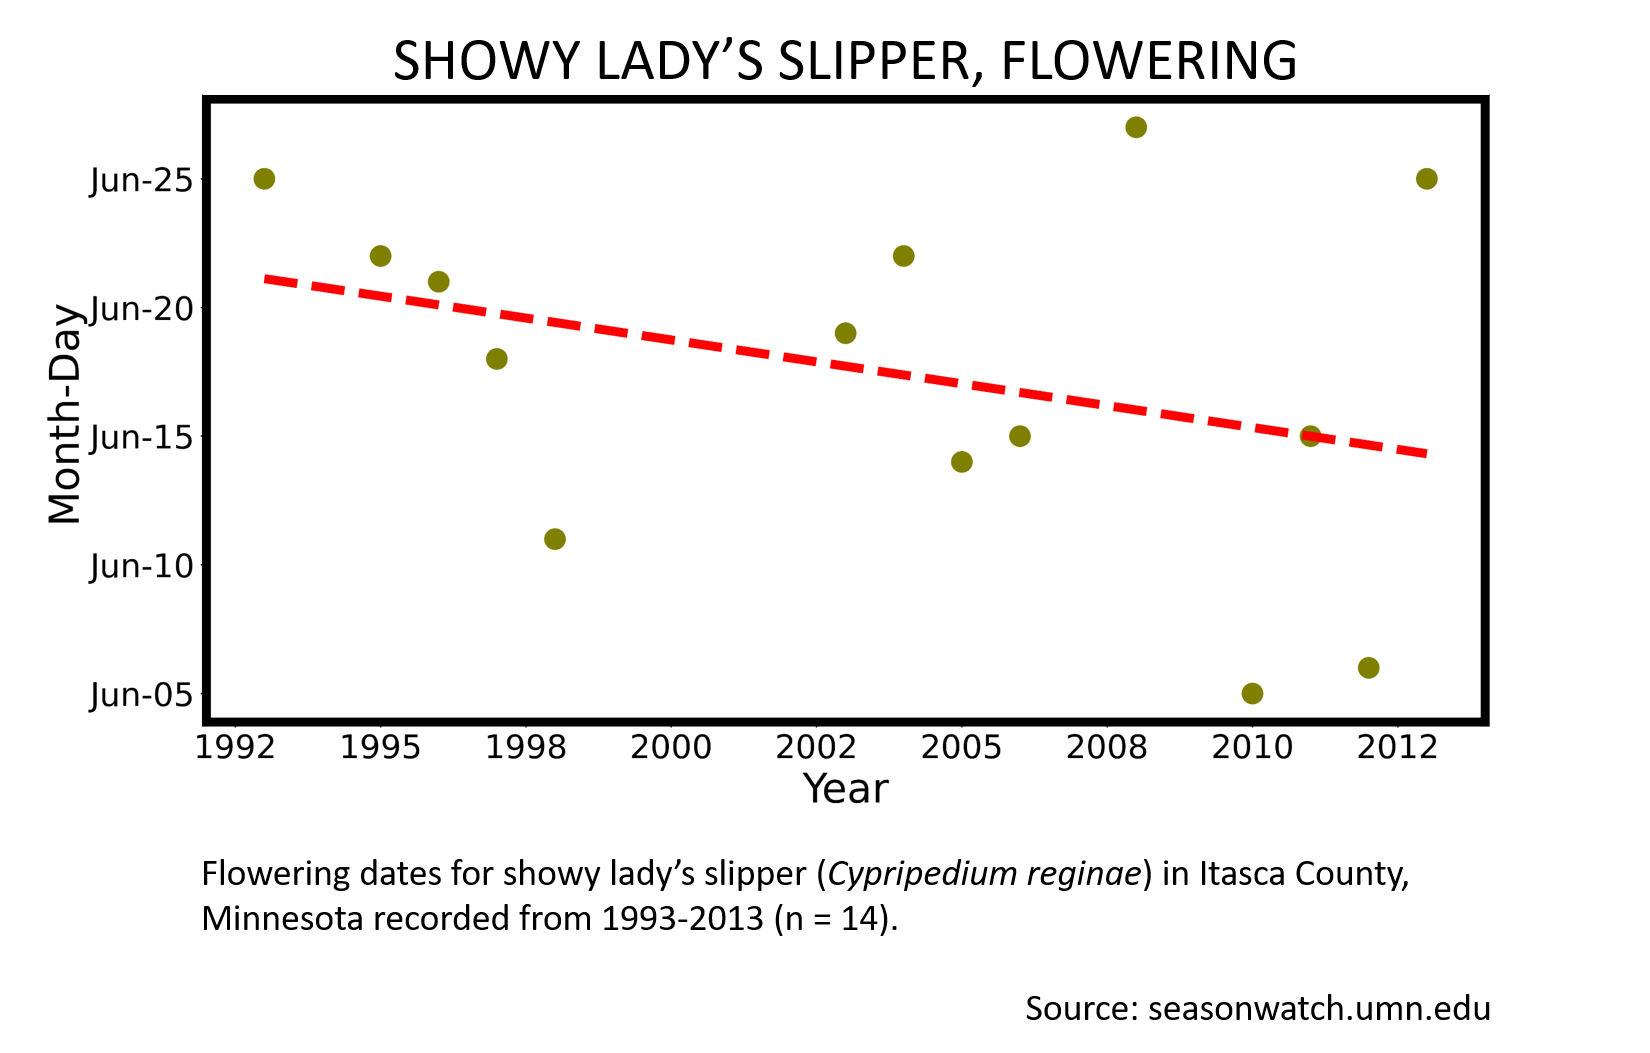 Scatterplot showing showy lady's slipper phenology observations in Itasca County, Minnesota